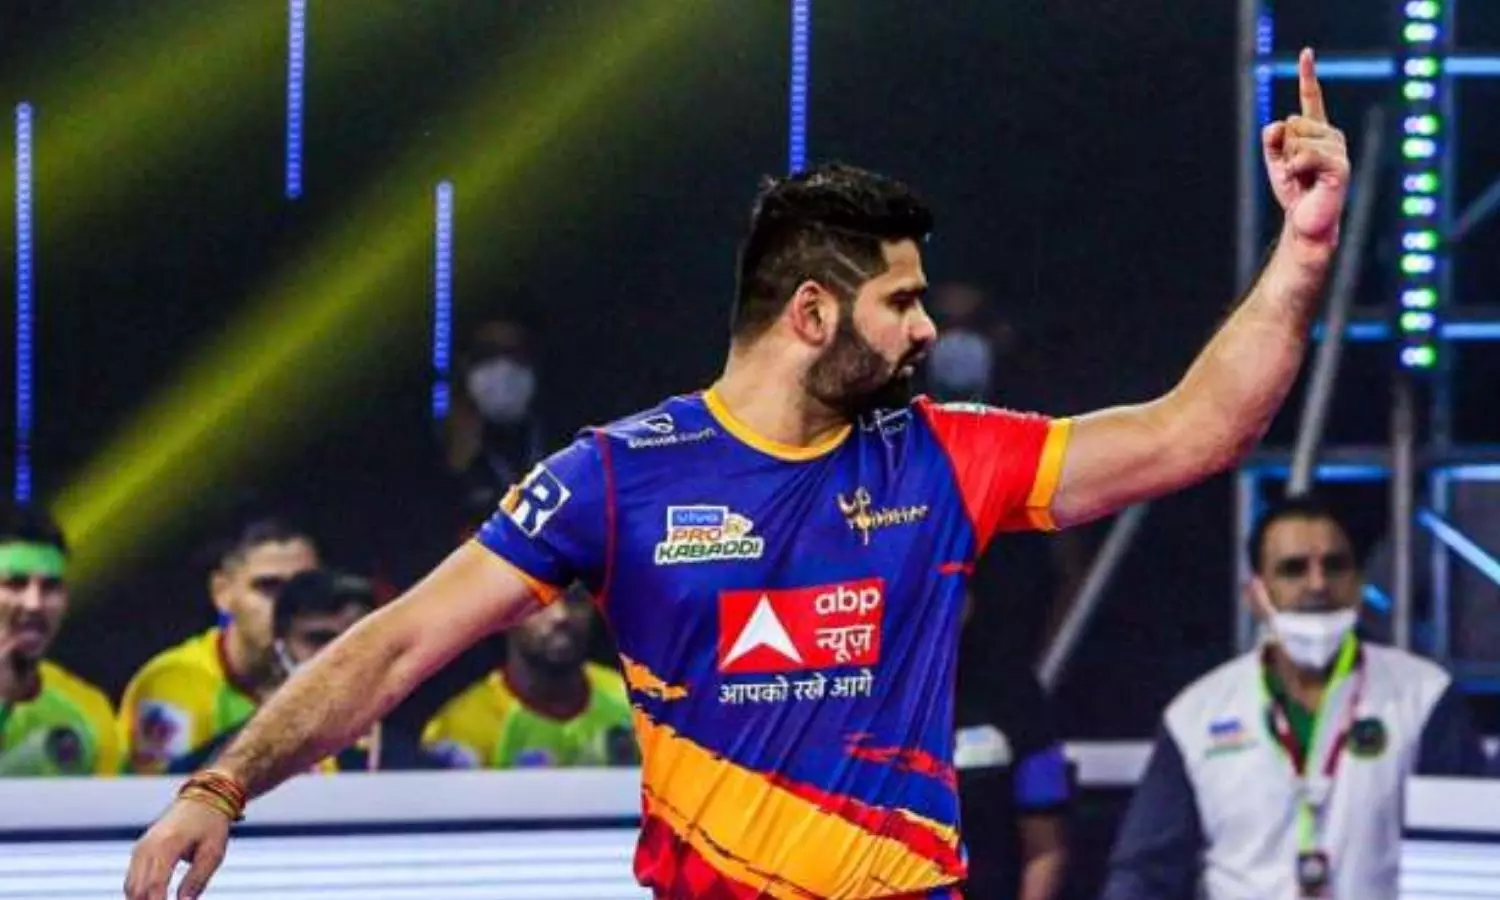 PKL | After becoming first to 1500 points, Pardeep Narwal eyes more records this season